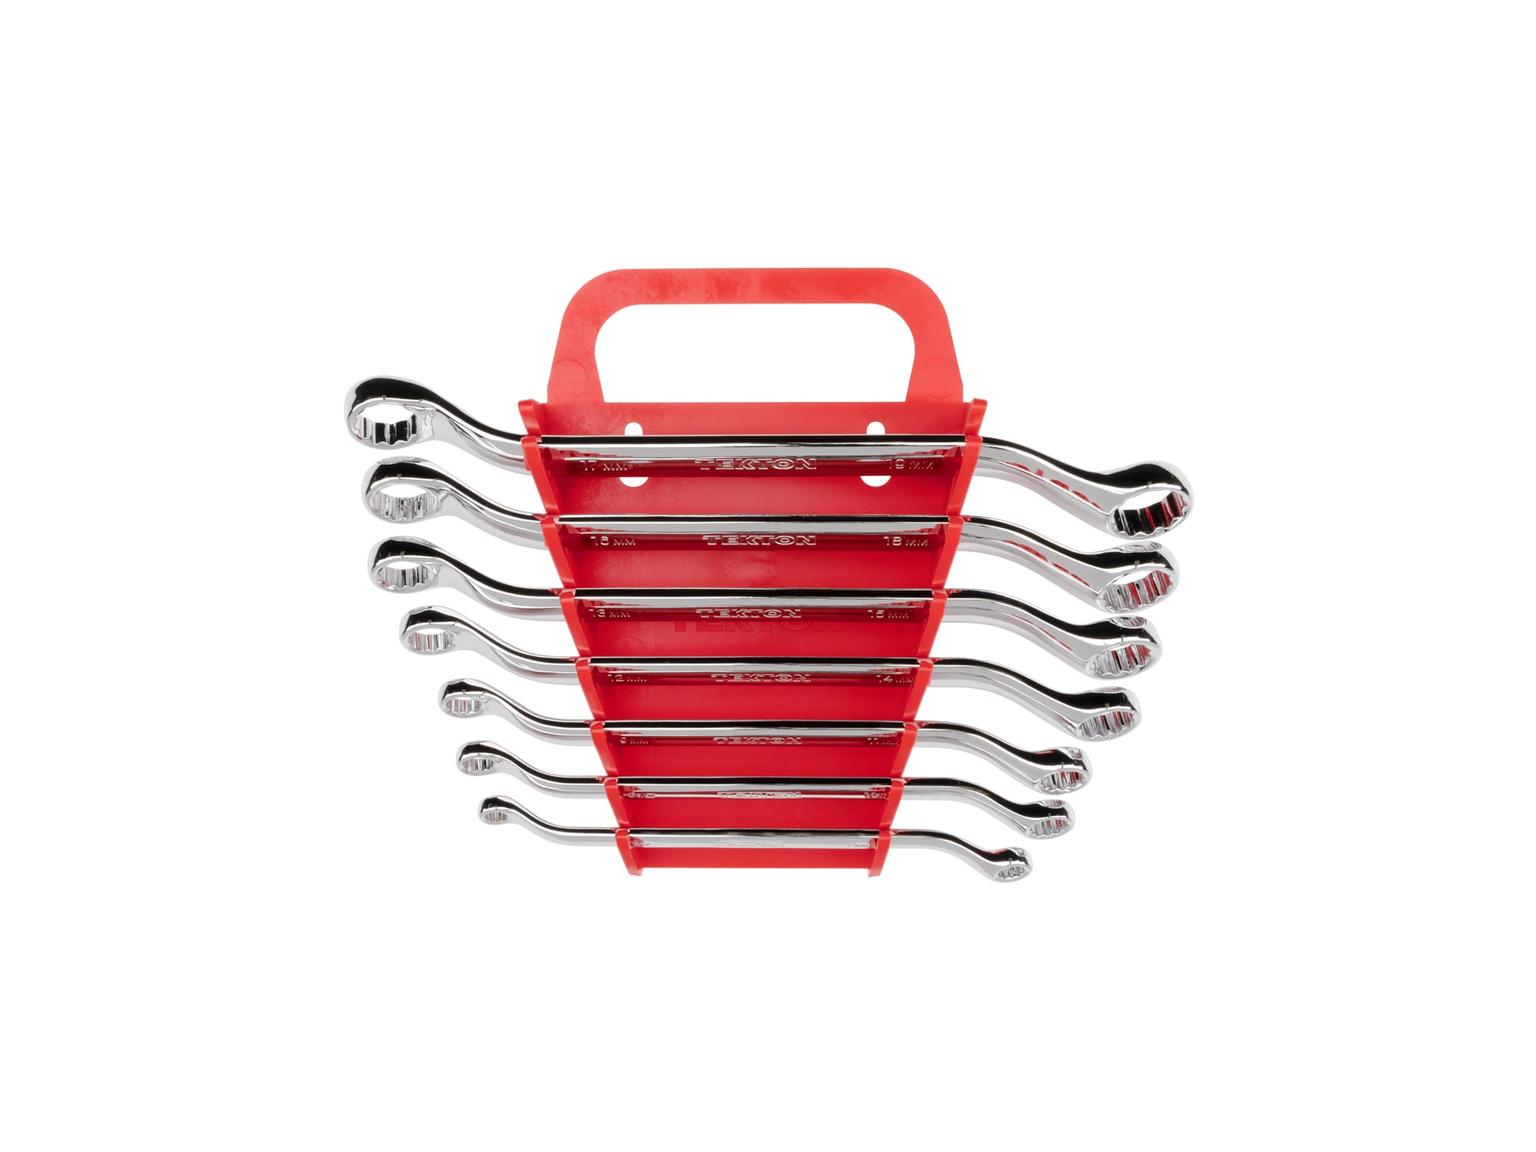 45-Degree Offset Box End Wrench Set, 7-Piece (Holder)